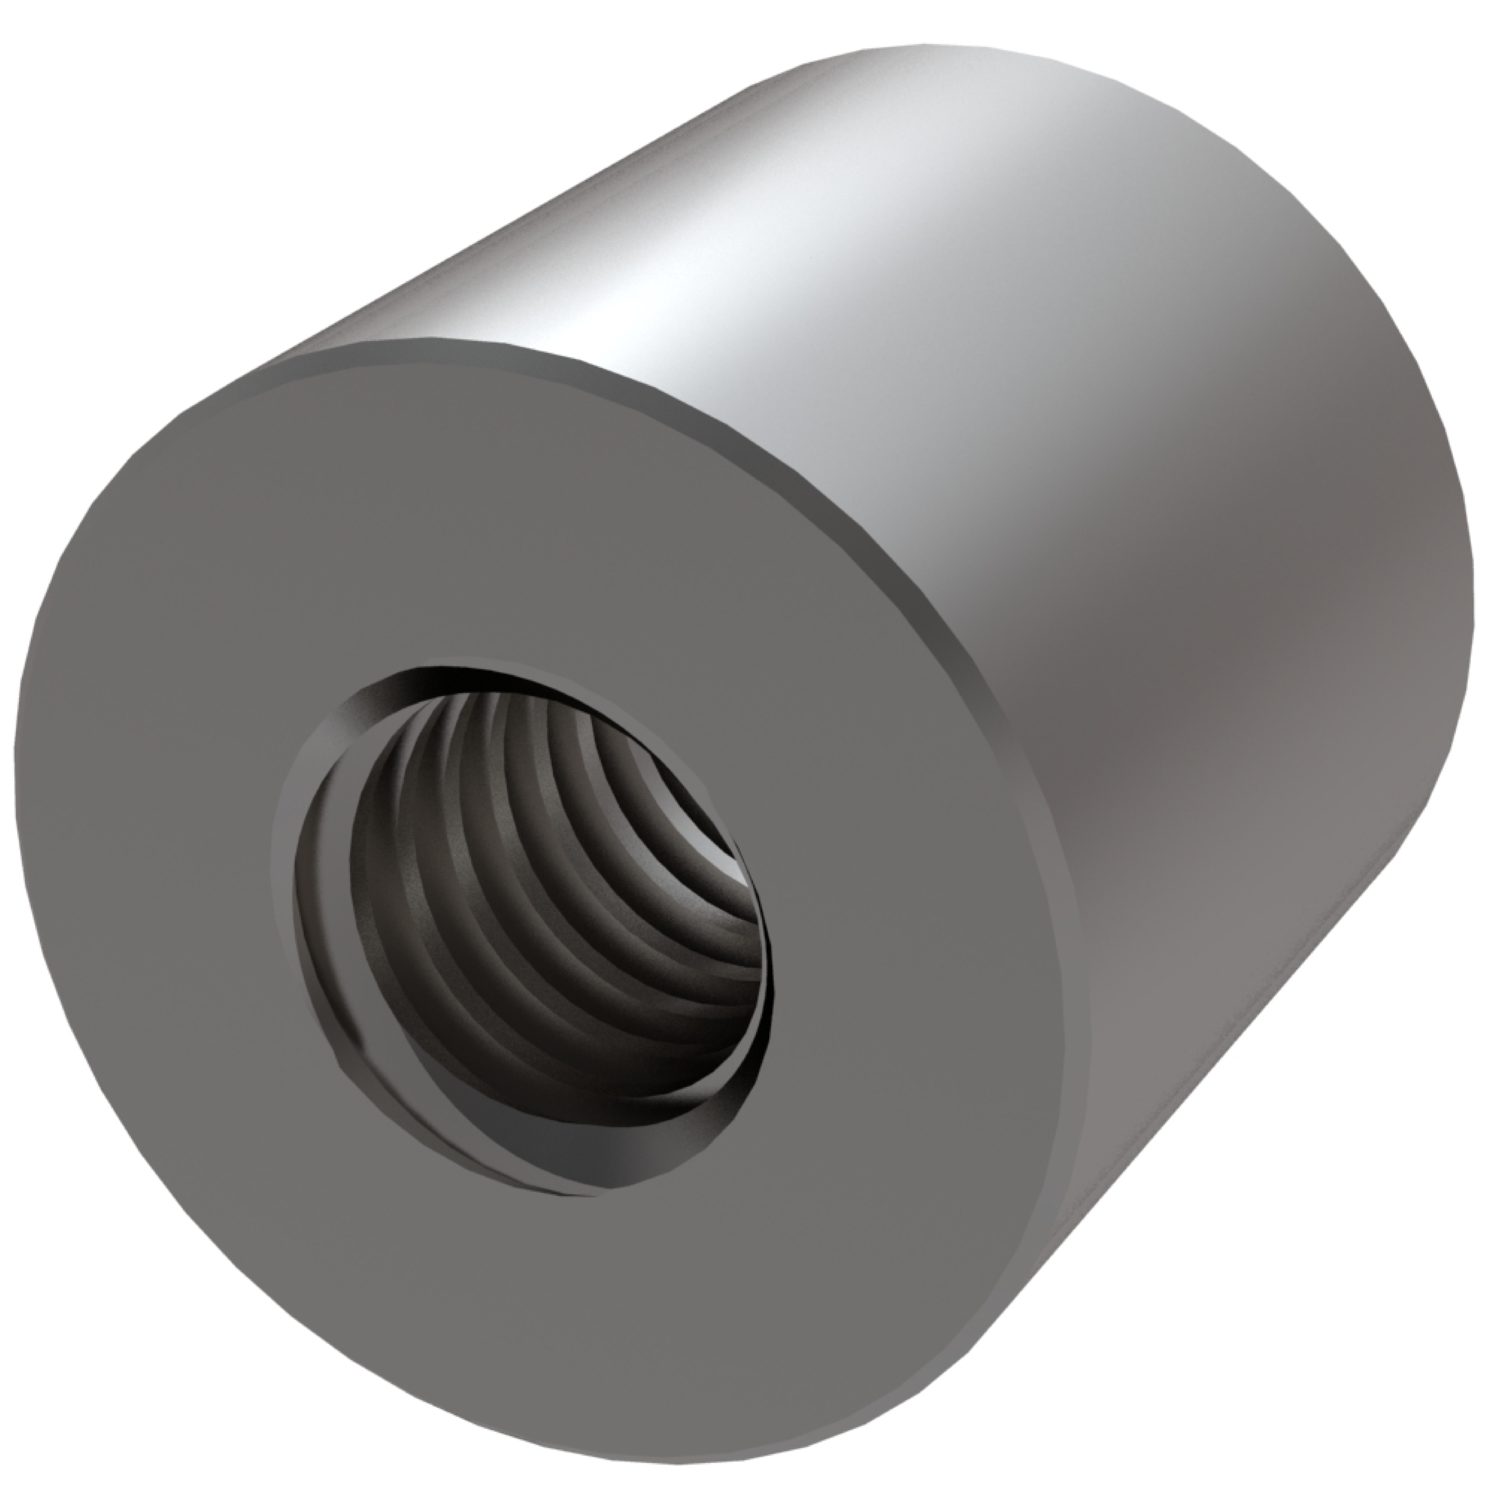 Cylindrical Stainless Steel Nuts Stainless steel lead screw nut for trapezoidal thread. Stainless steel offers excellent corrosion resistance.